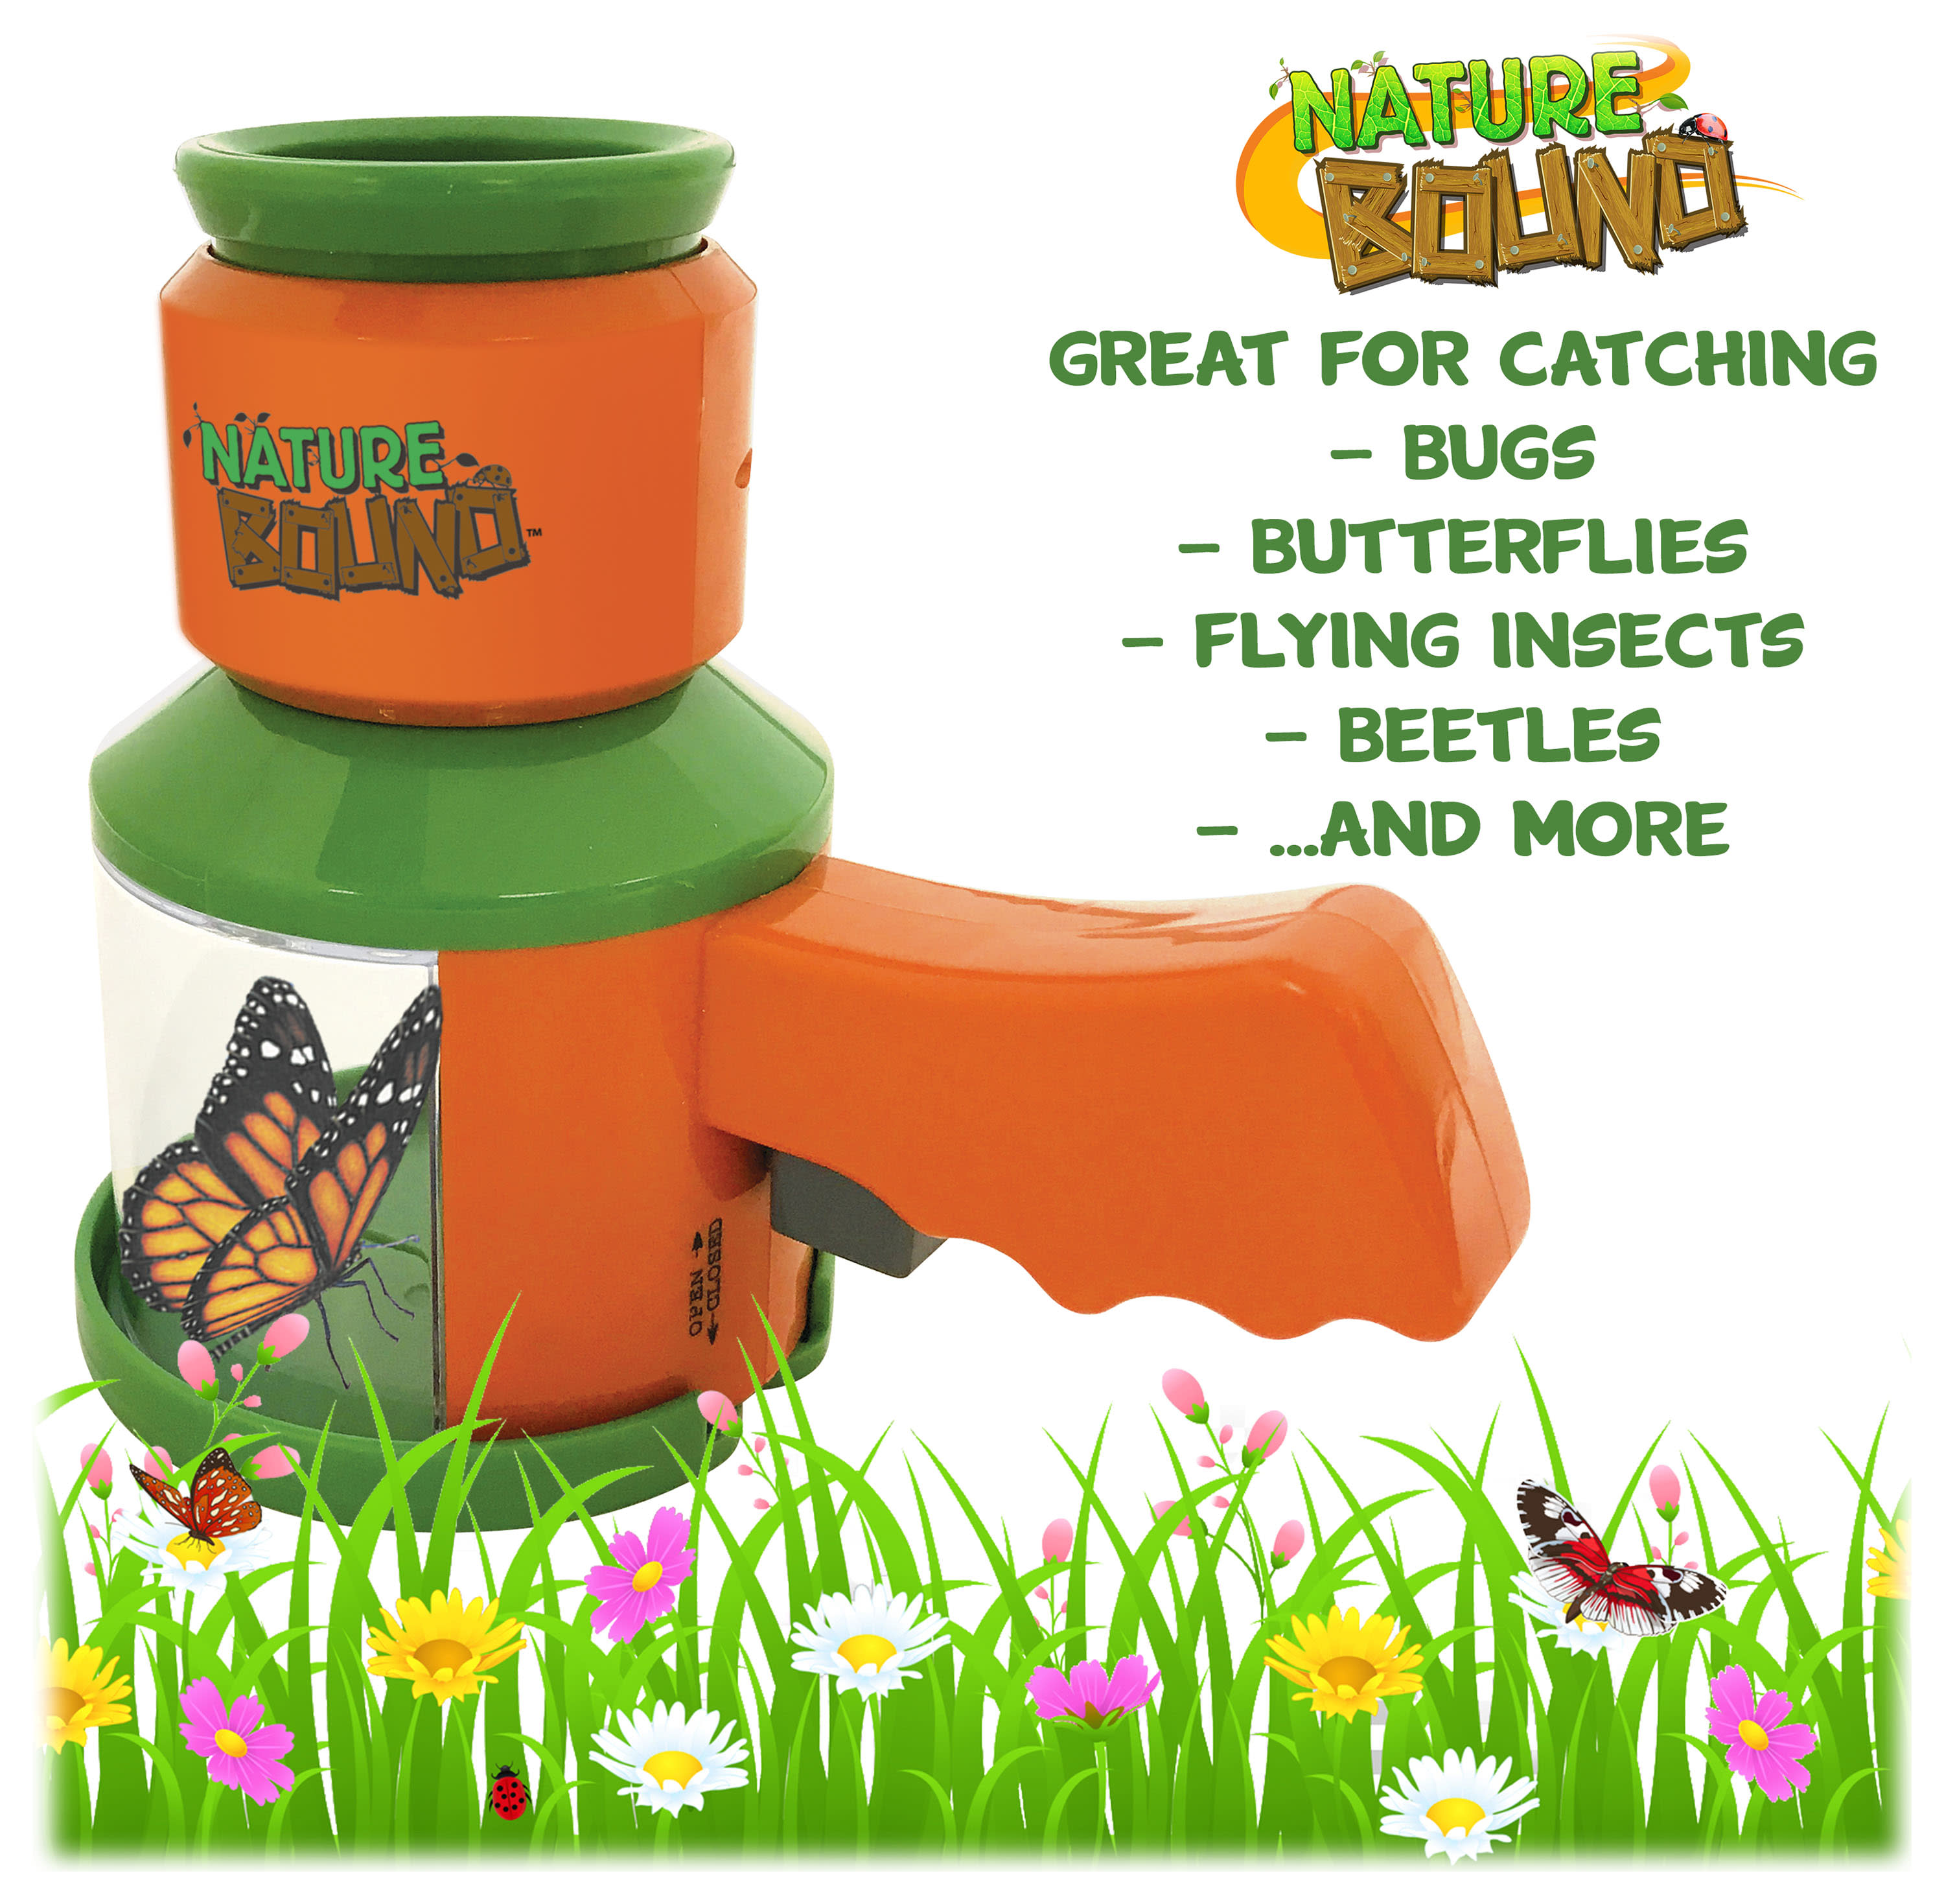 Nature Bound® Bug Catcher and Viewer